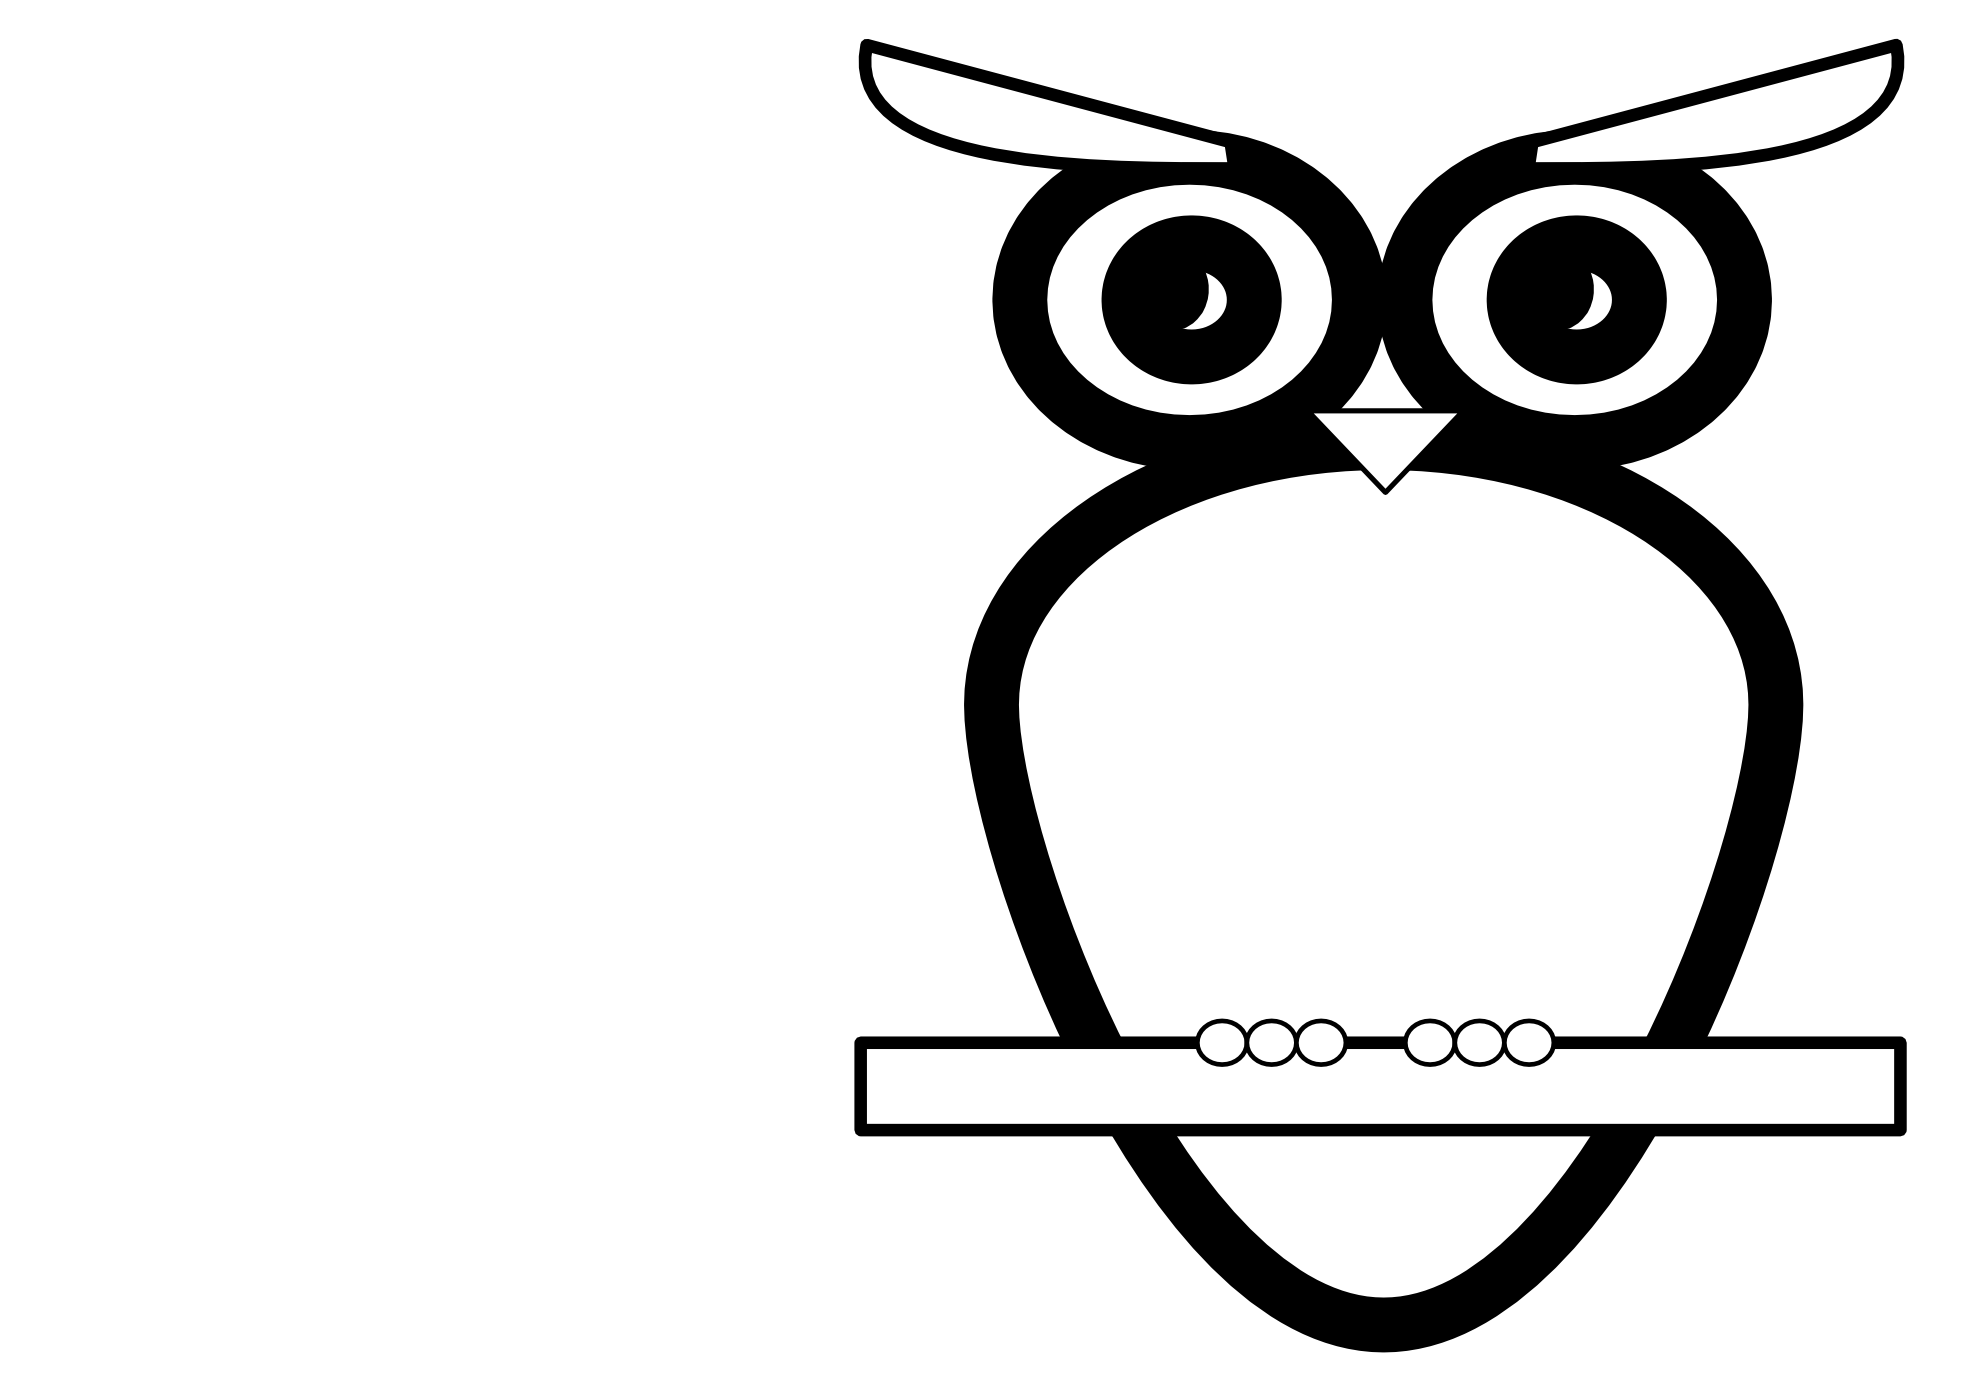 owl clipart black and white free - photo #38